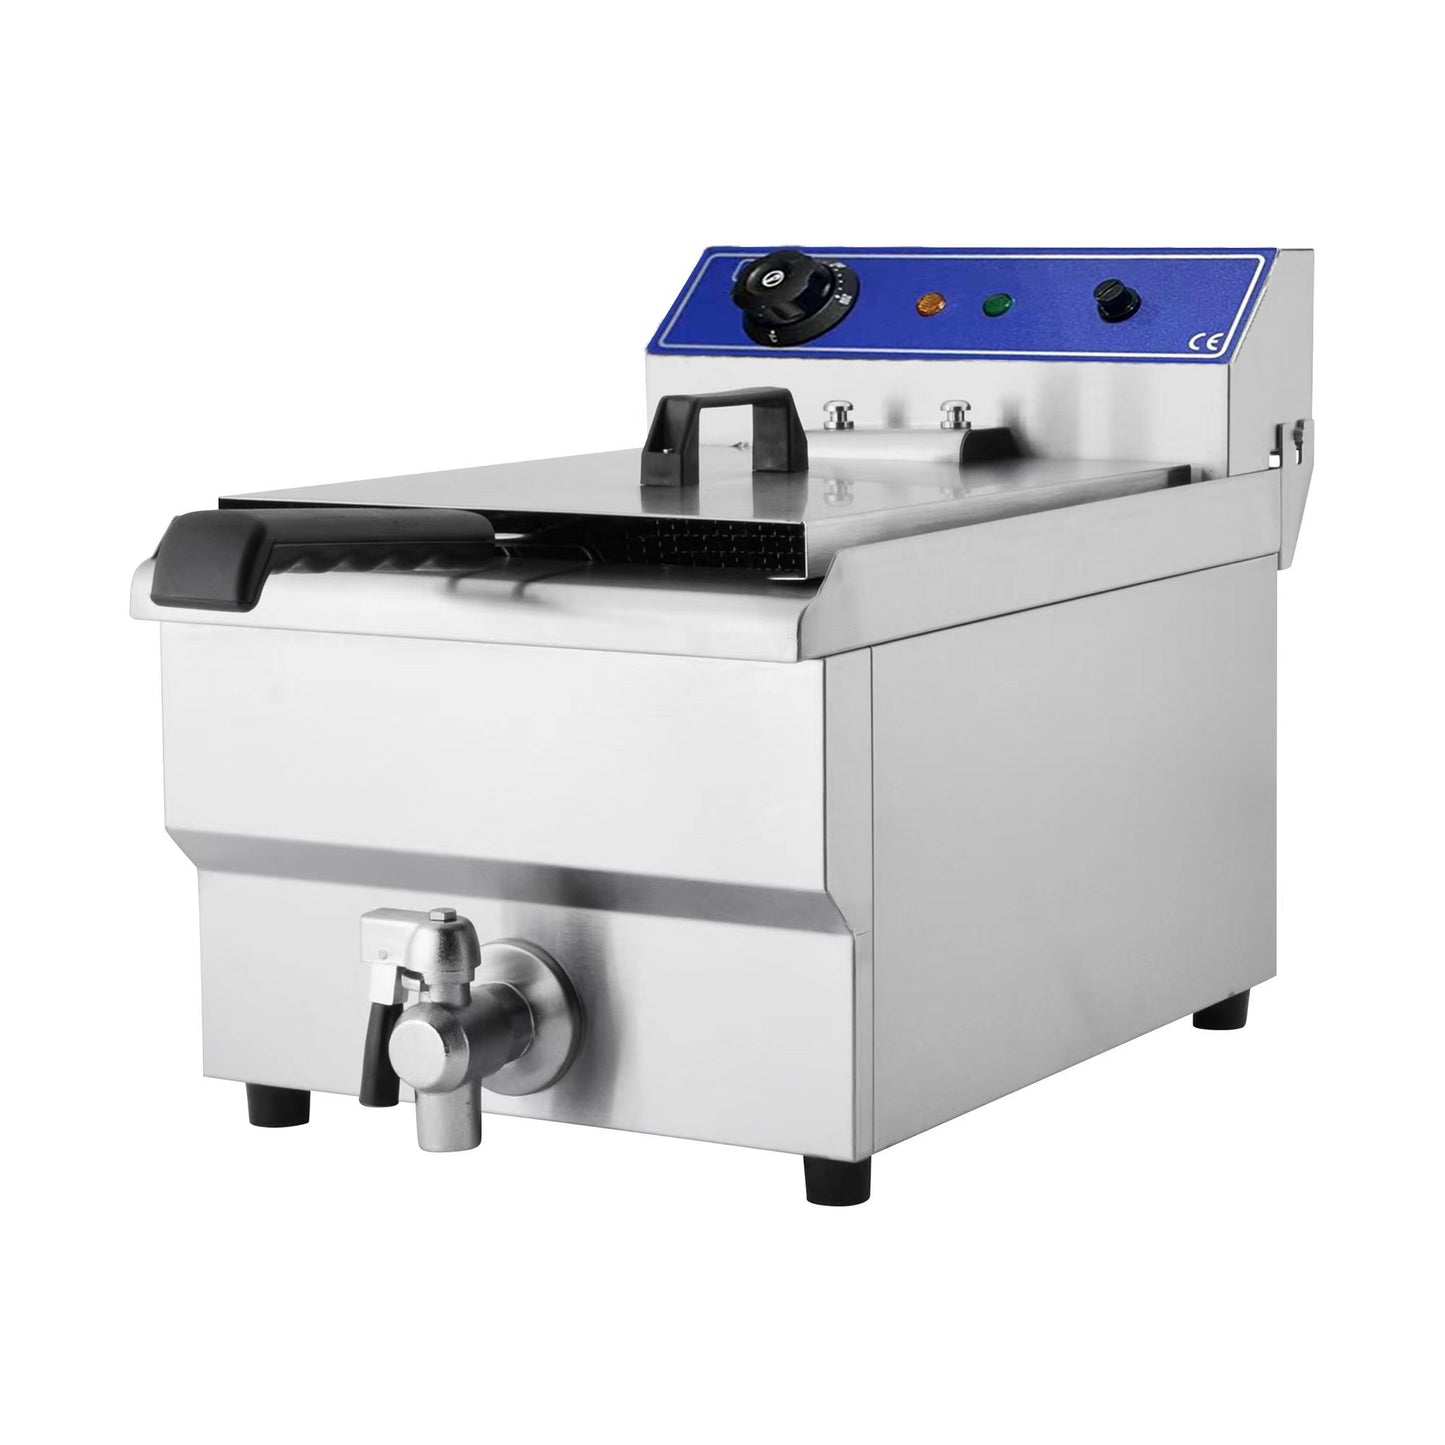 161005 - Electric Fryer - 8 Litre Single Tank with Tap